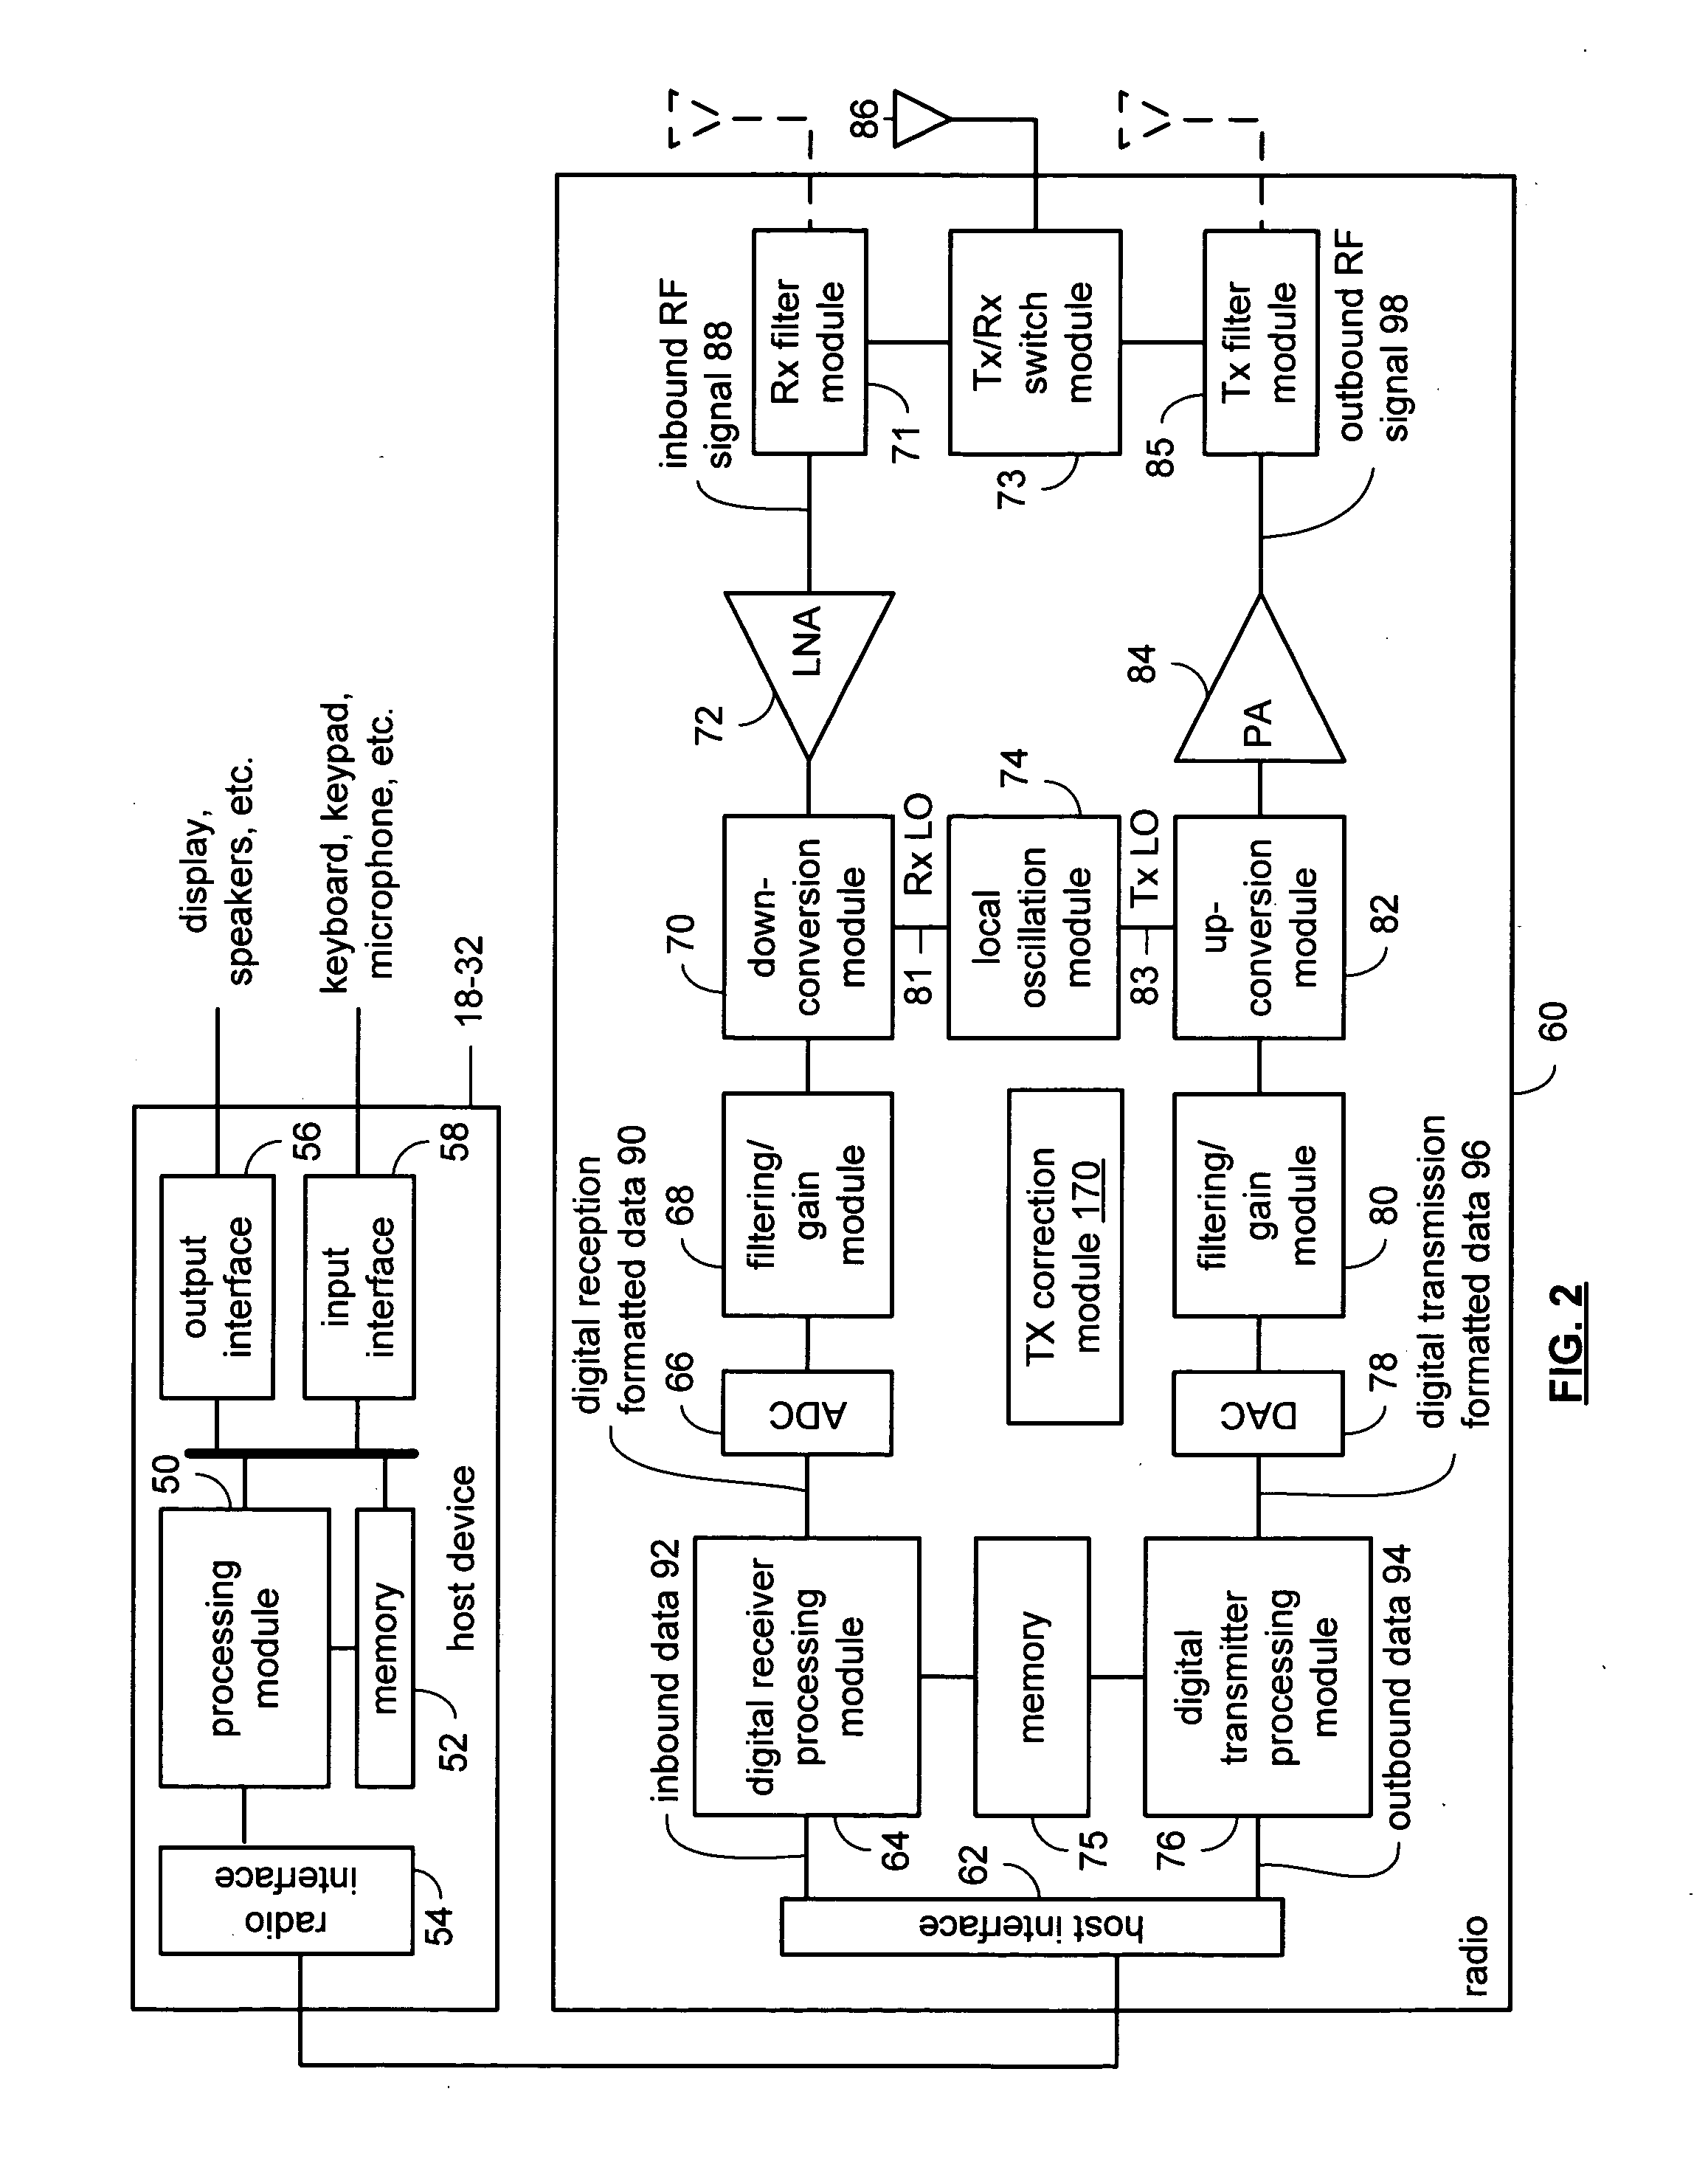 RF transmission error detection and correction module